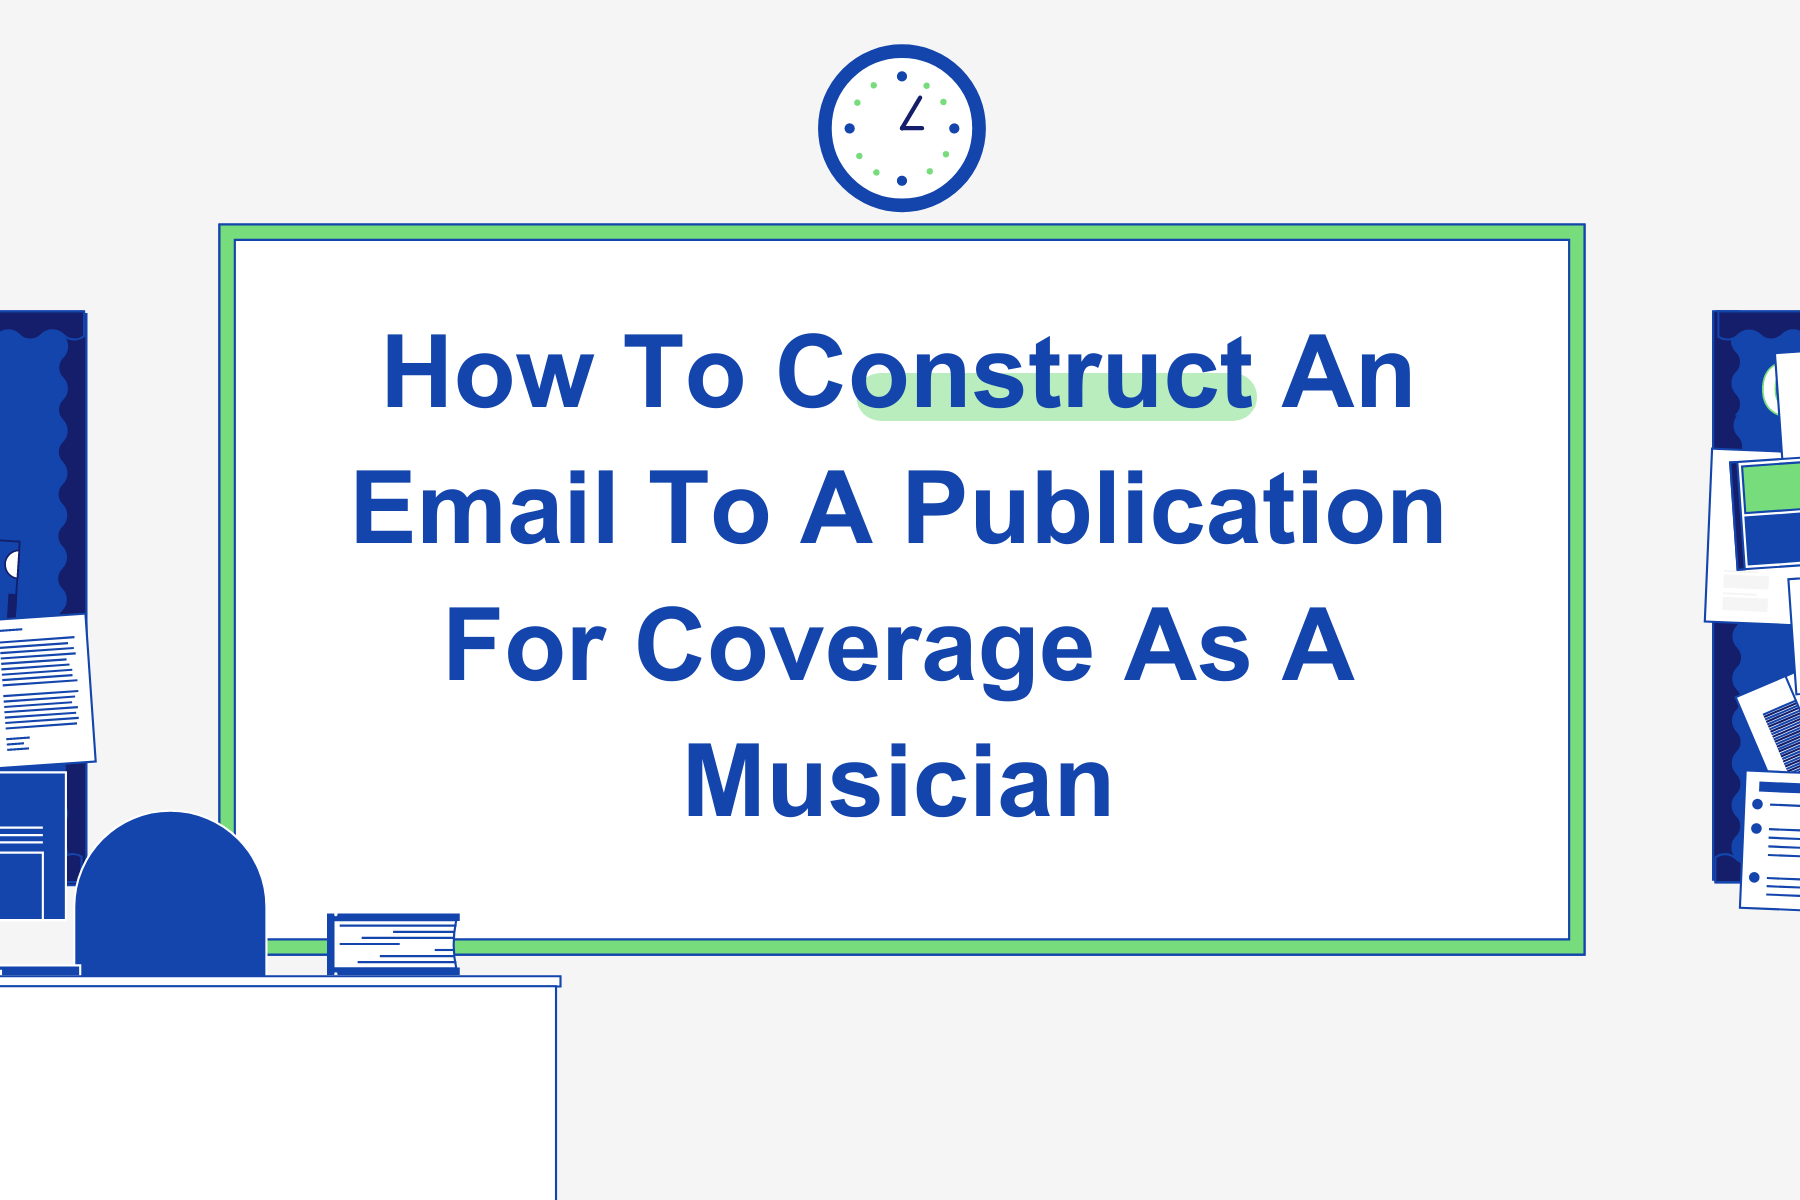 How To Construct An Email To A Publication For Coverage As A Musician